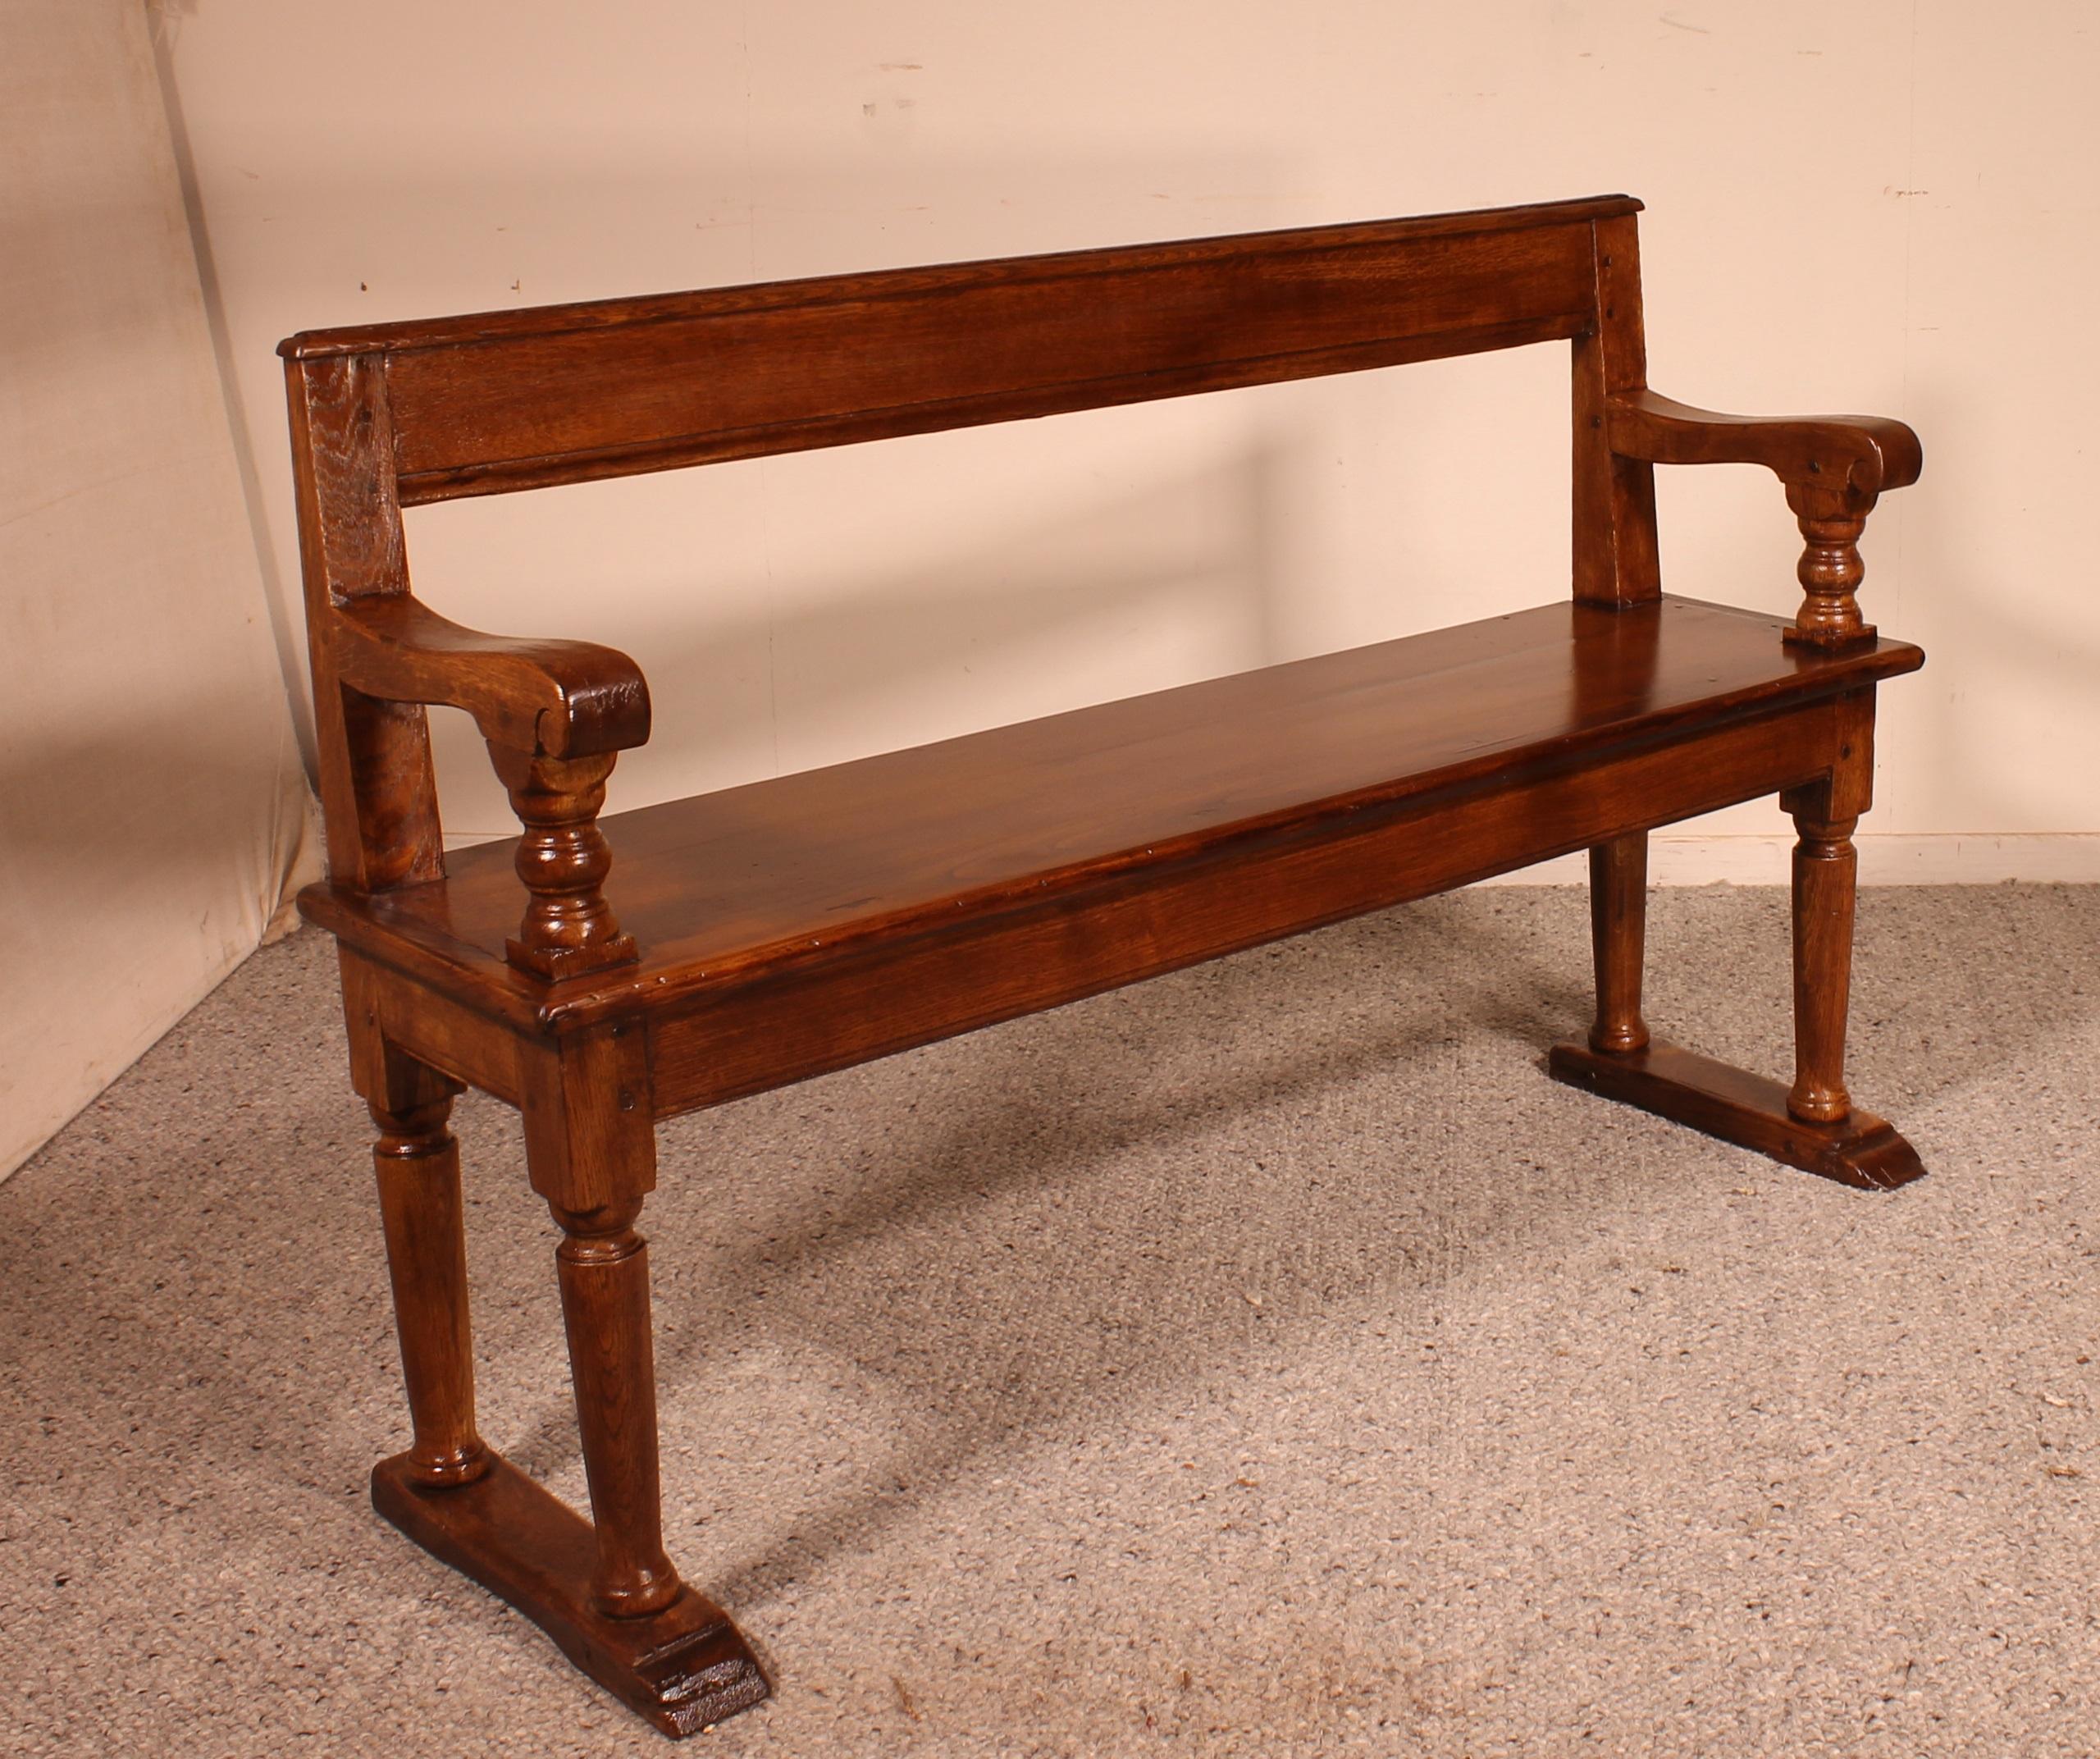 Elegant French bench from the 18th century in oak with backrest and armrest
The base and backrest are in oak and the seat is in cherrywood
Elegant turning
Superb patina and in perfect condition


Delivery in Belgium, France and abroad